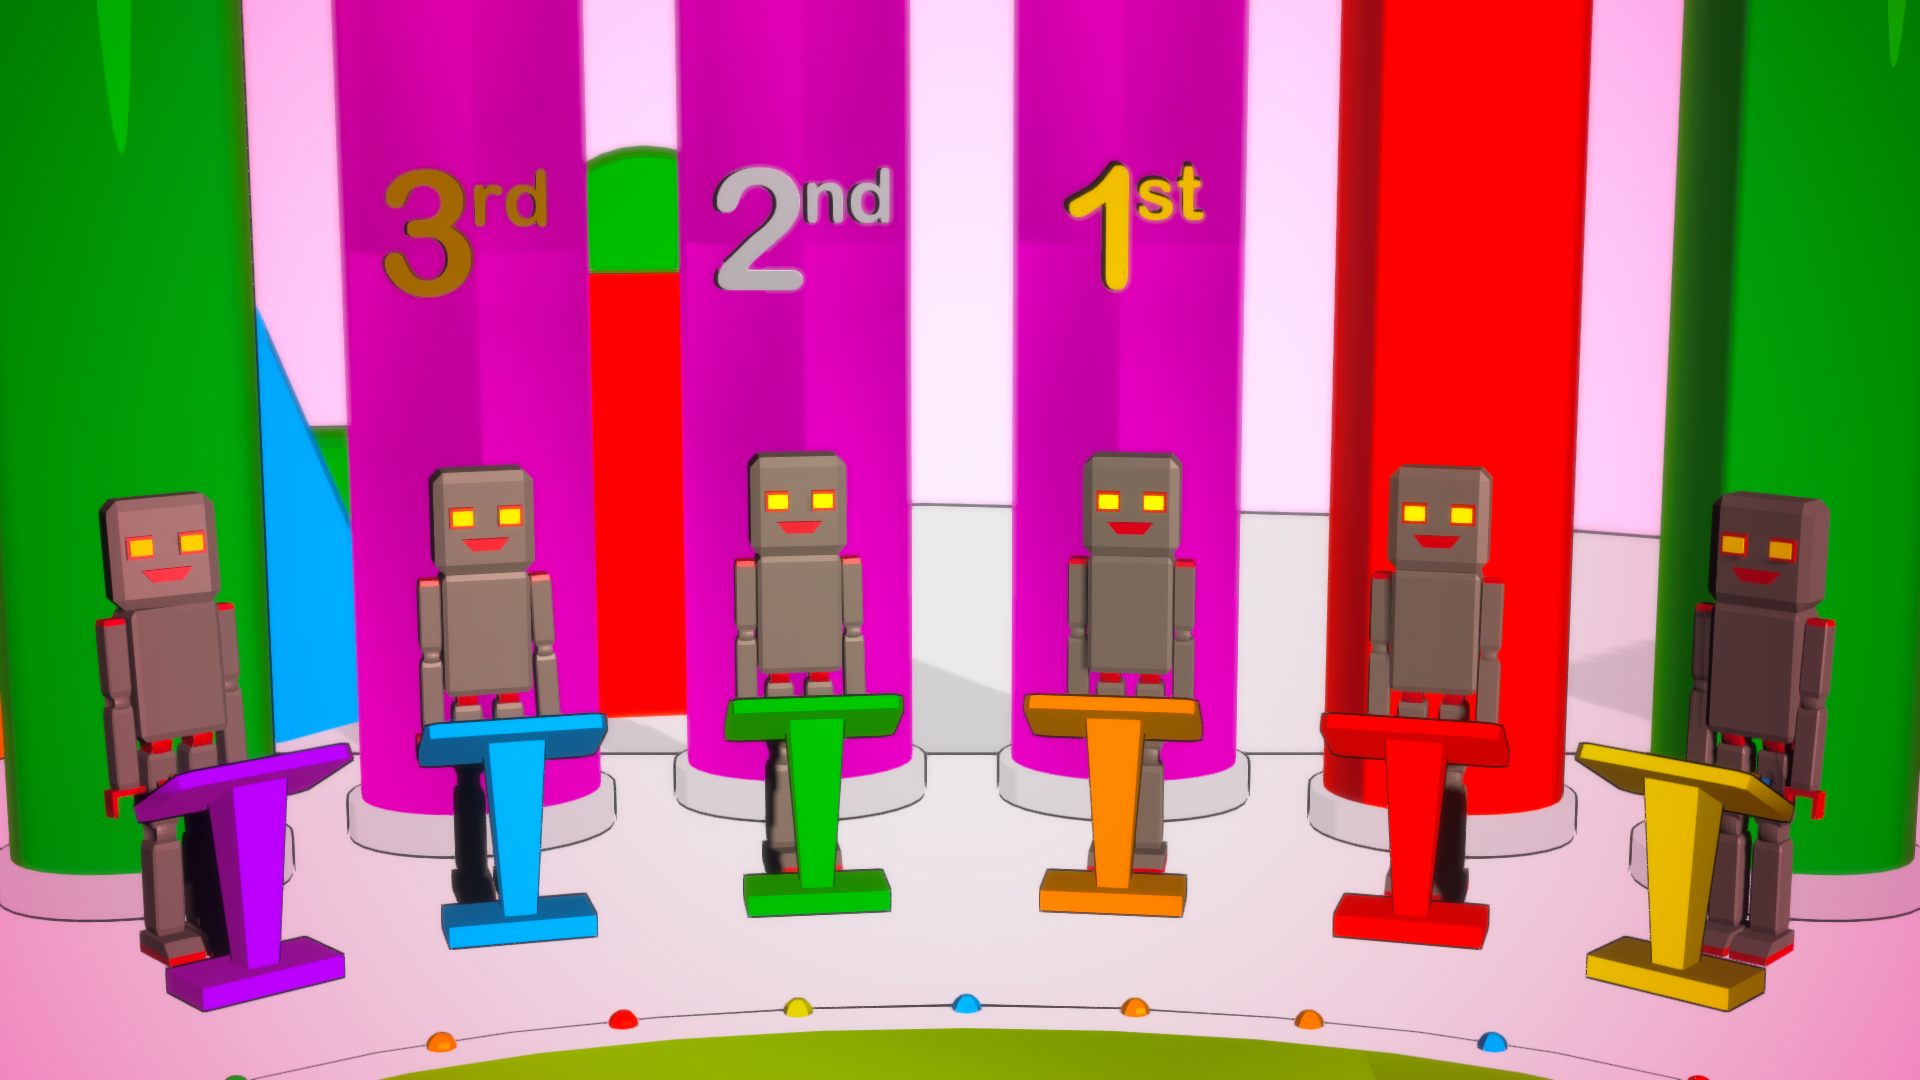 Winning scores revealed in Robot Trivia Funtime